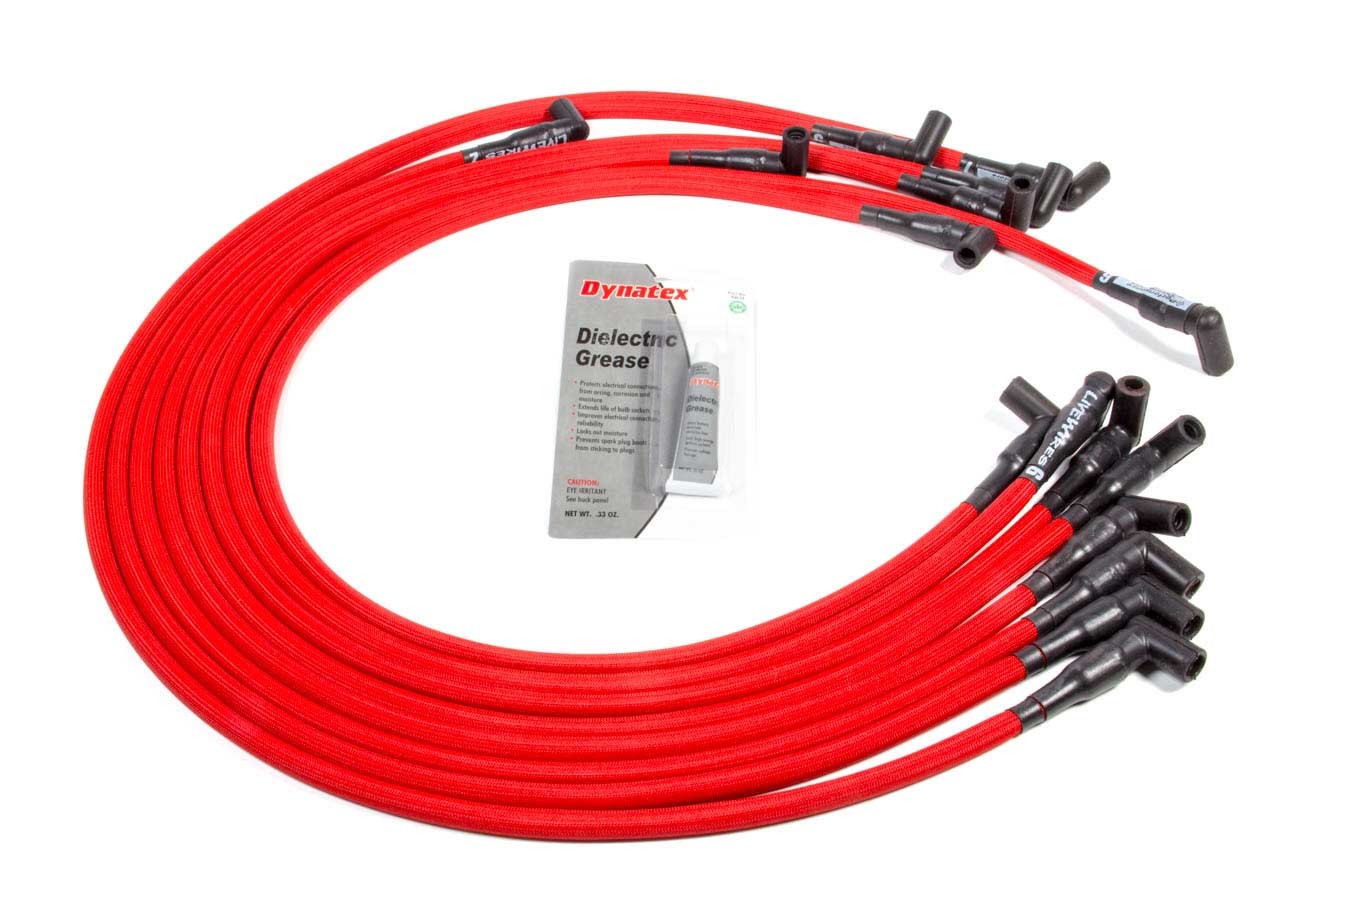 Performance Distributors C9054RD Spark Plug Wire Set, Livewires, Spiral Core, 10 mm, Red, 90 Degree Plug Boots, HEI Style Terminal, GM V8, Kit